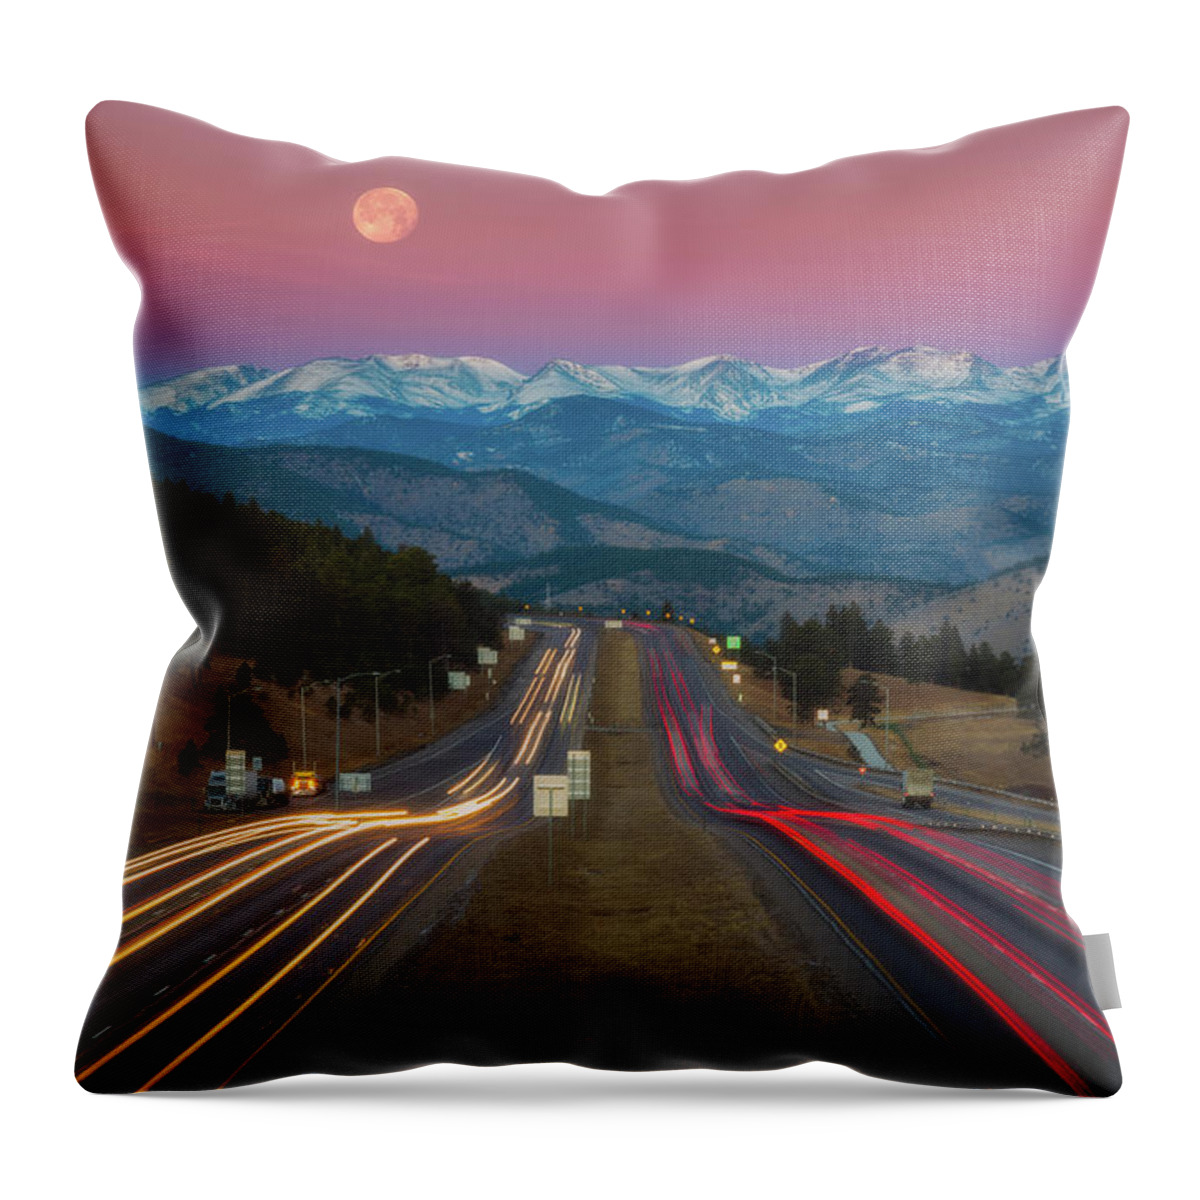 Moon Throw Pillow featuring the photograph Moon Over the Rockies by Darren White